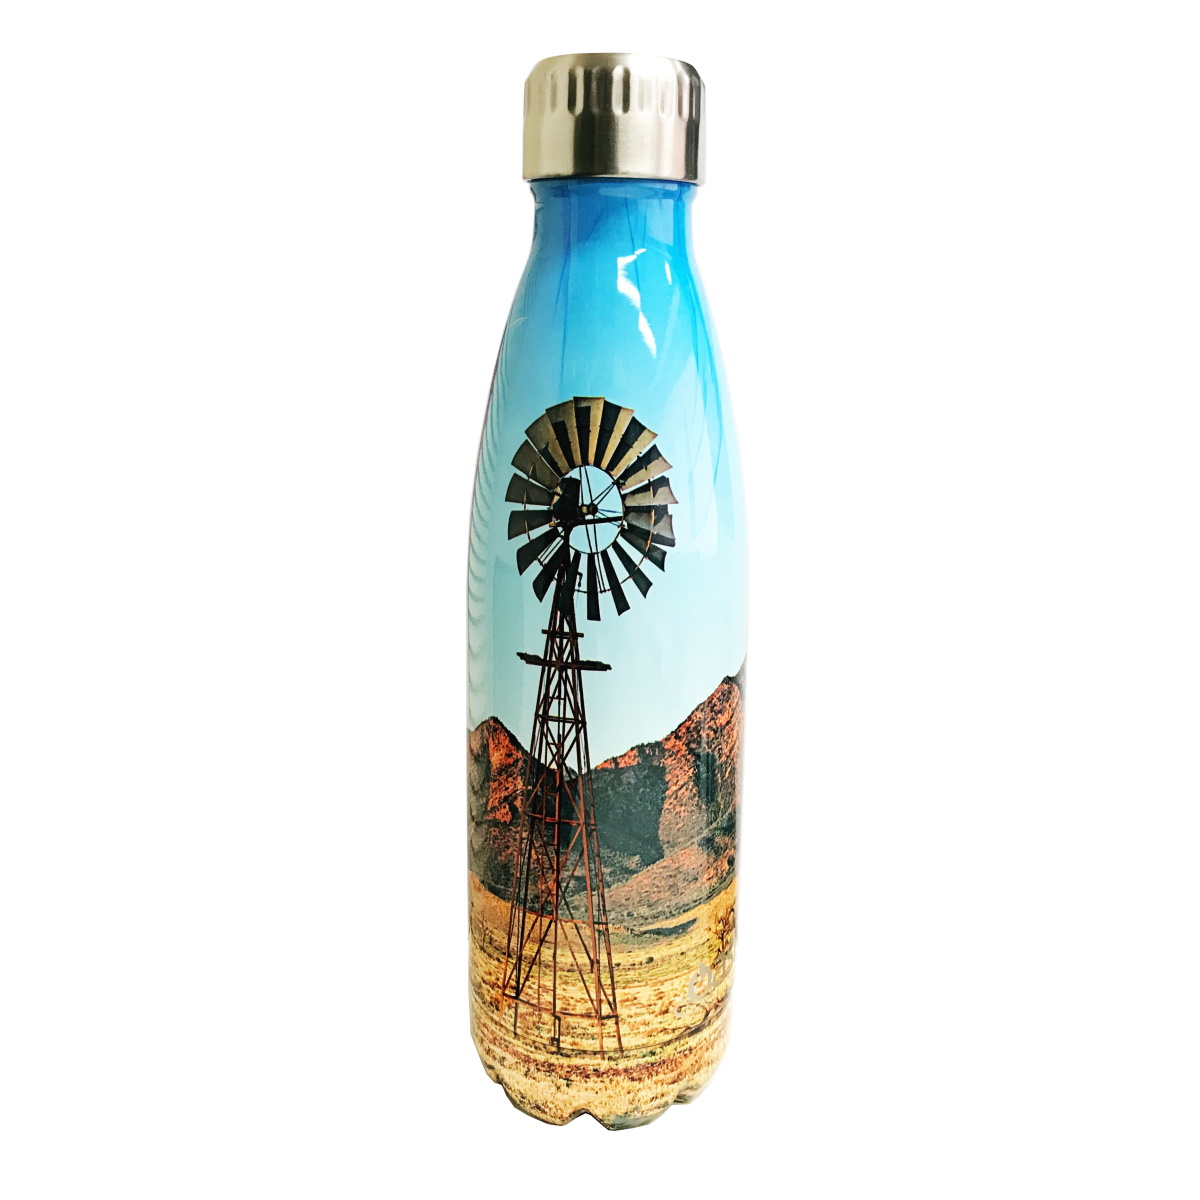 Oasis Stainless Steel Double Wall Insulated Drink Bottle 500ml - Outback